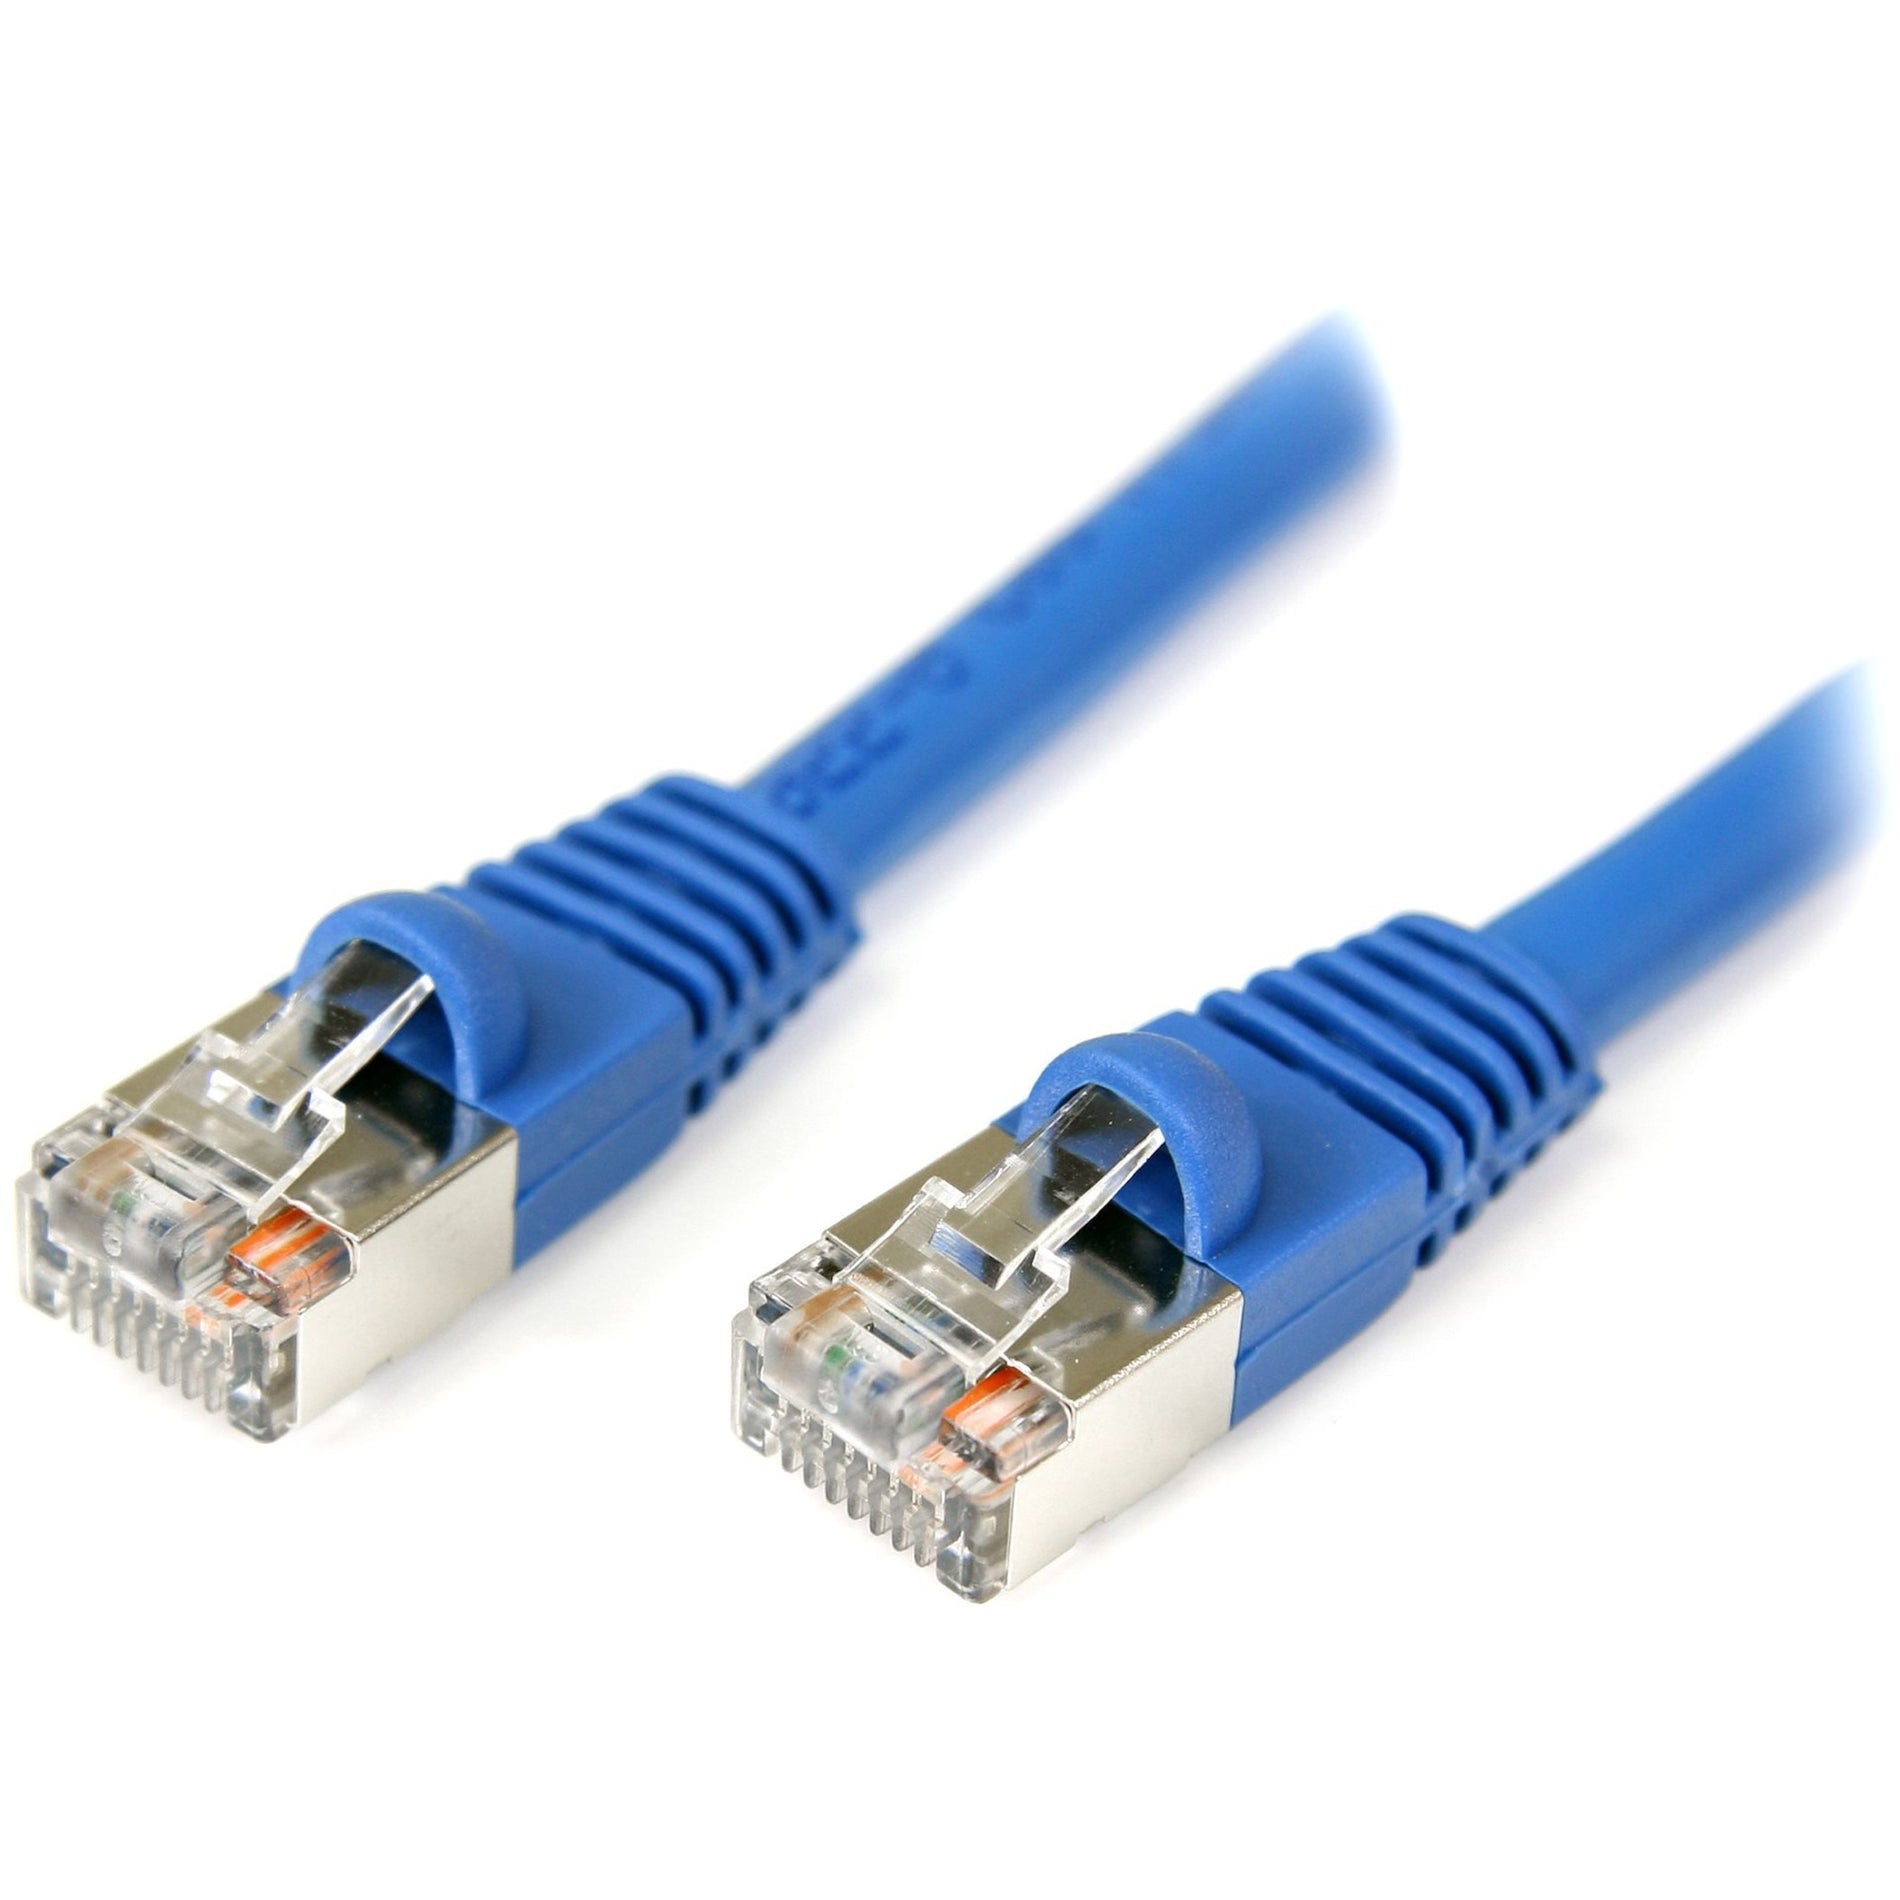 StarTech.com S45PATCH6BL 6 ft Blue Snagless Shielded Cat5e Patch Cable, Strain Relief, Molded, Rugged, EMI/RF Protection